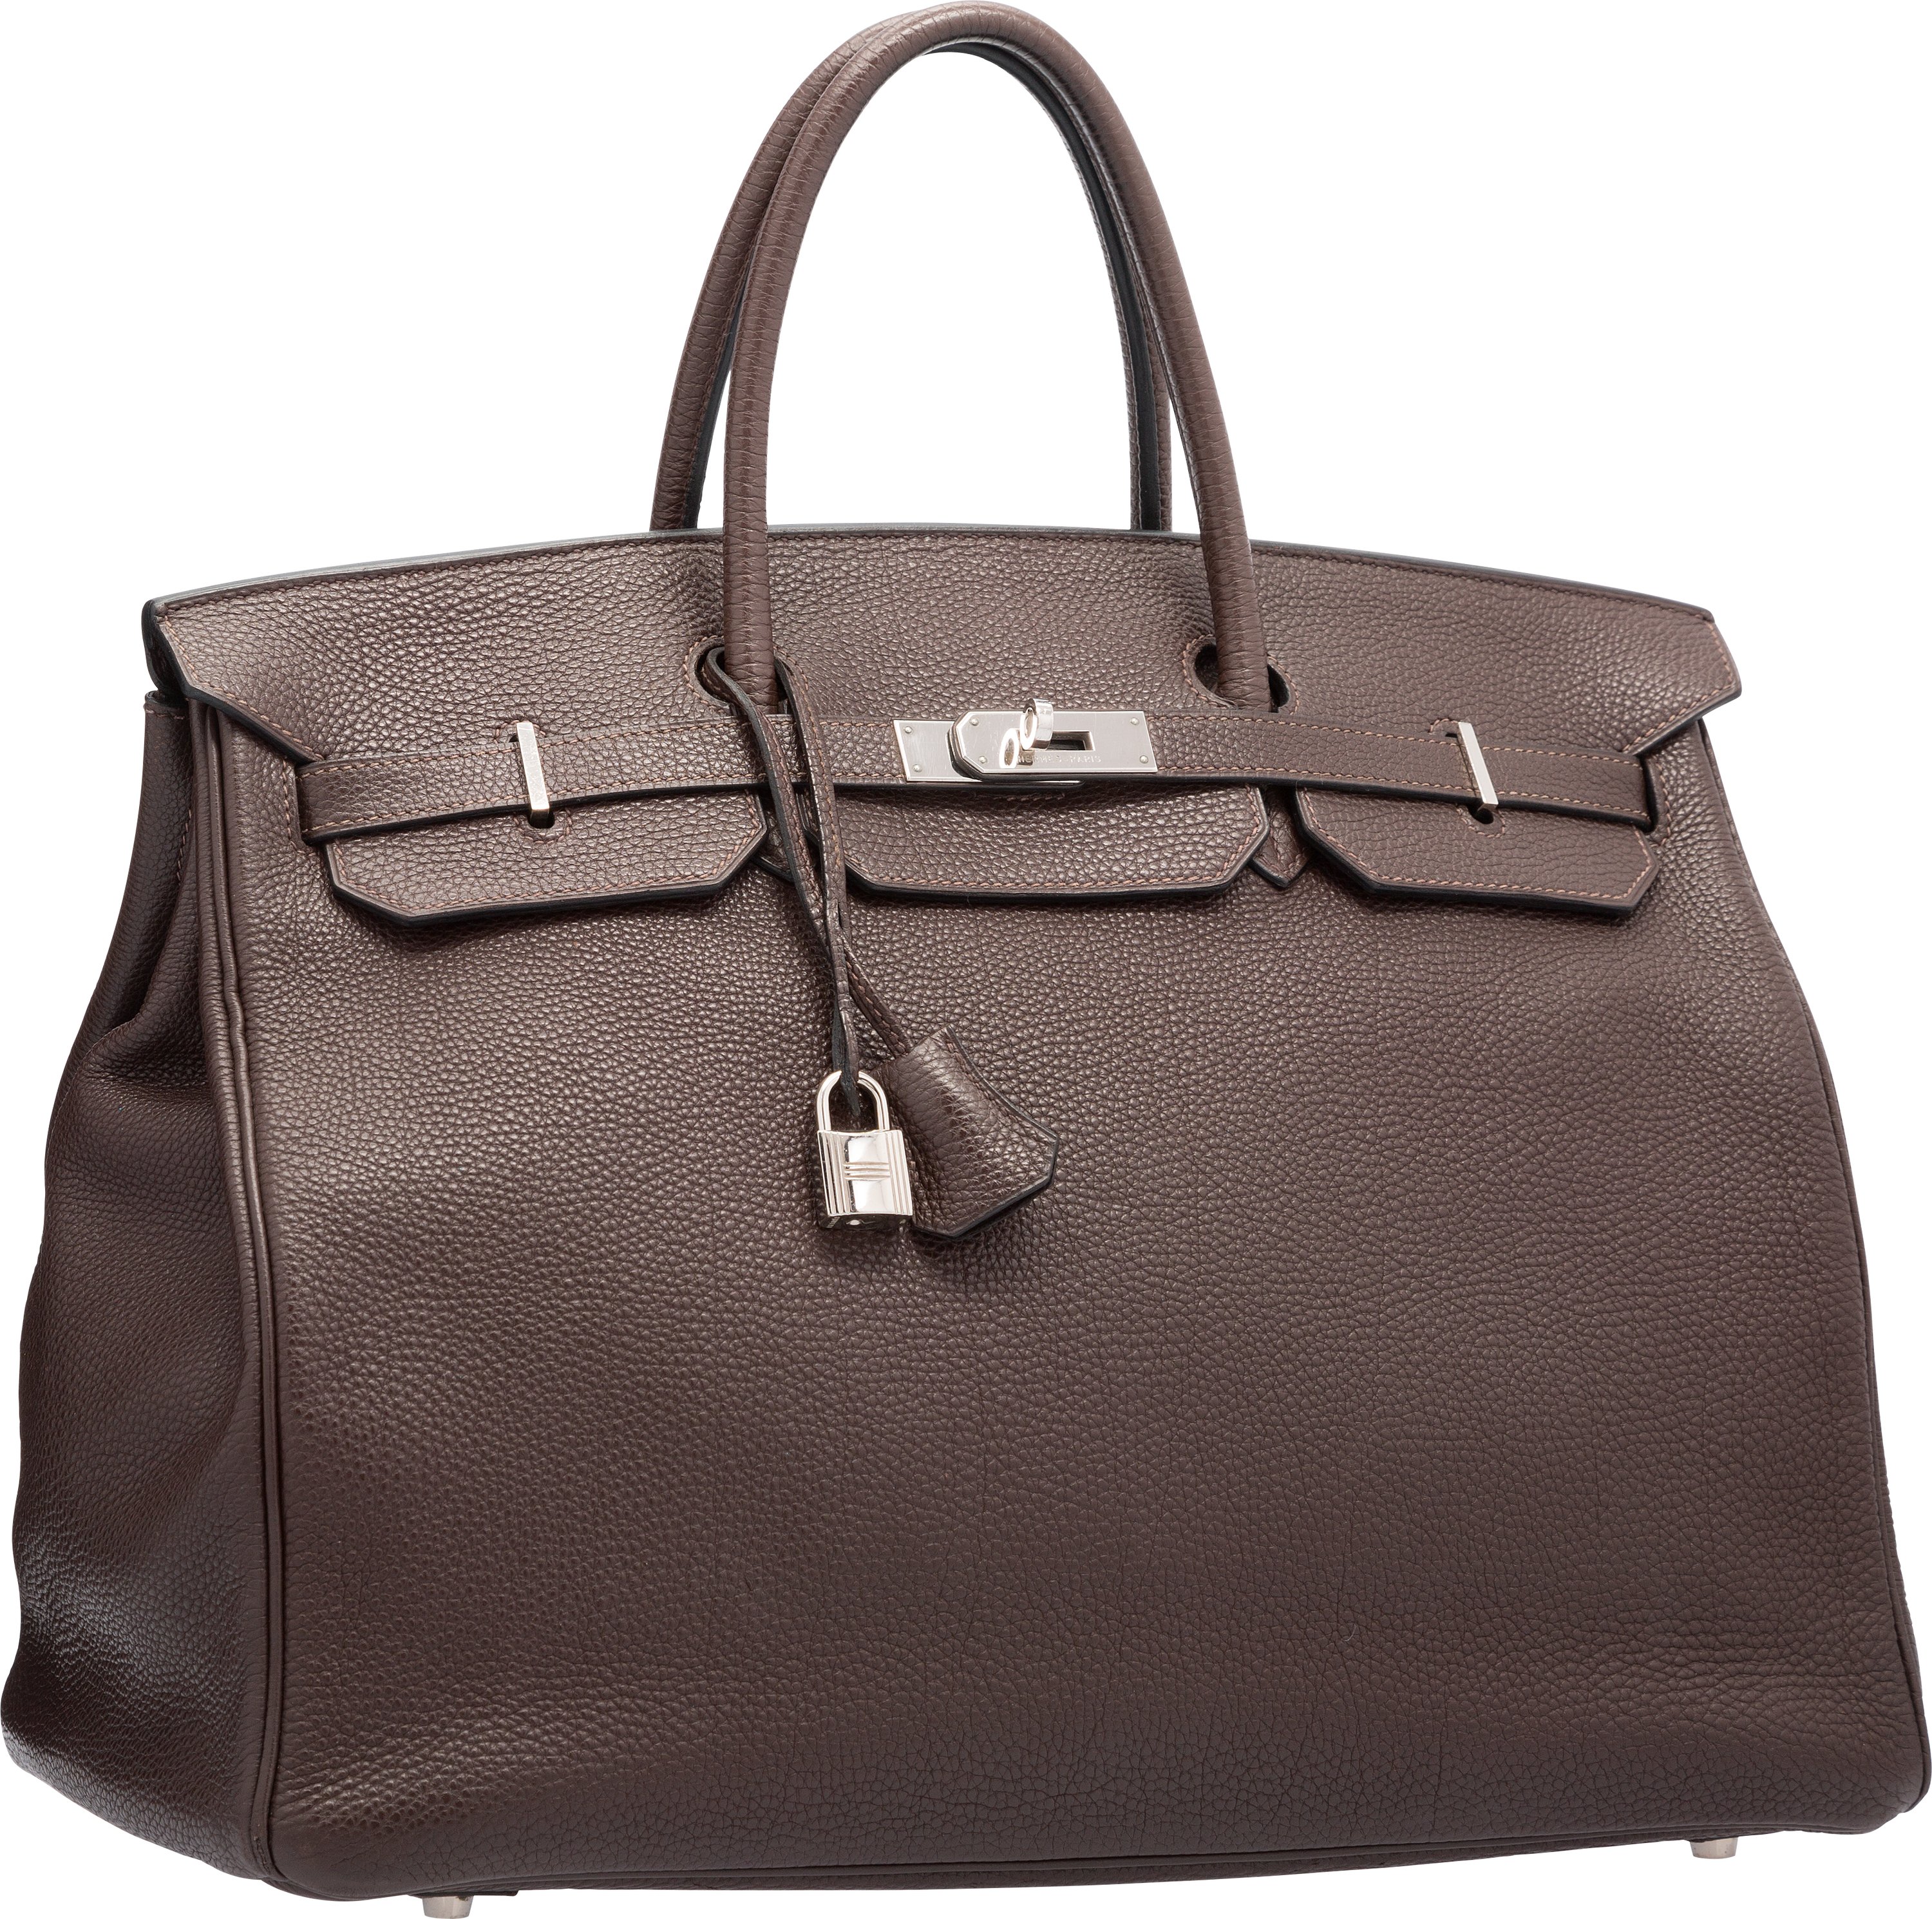 Sold at Auction: Hermes Birkin 35 Bag, Chocolate Togo Leather